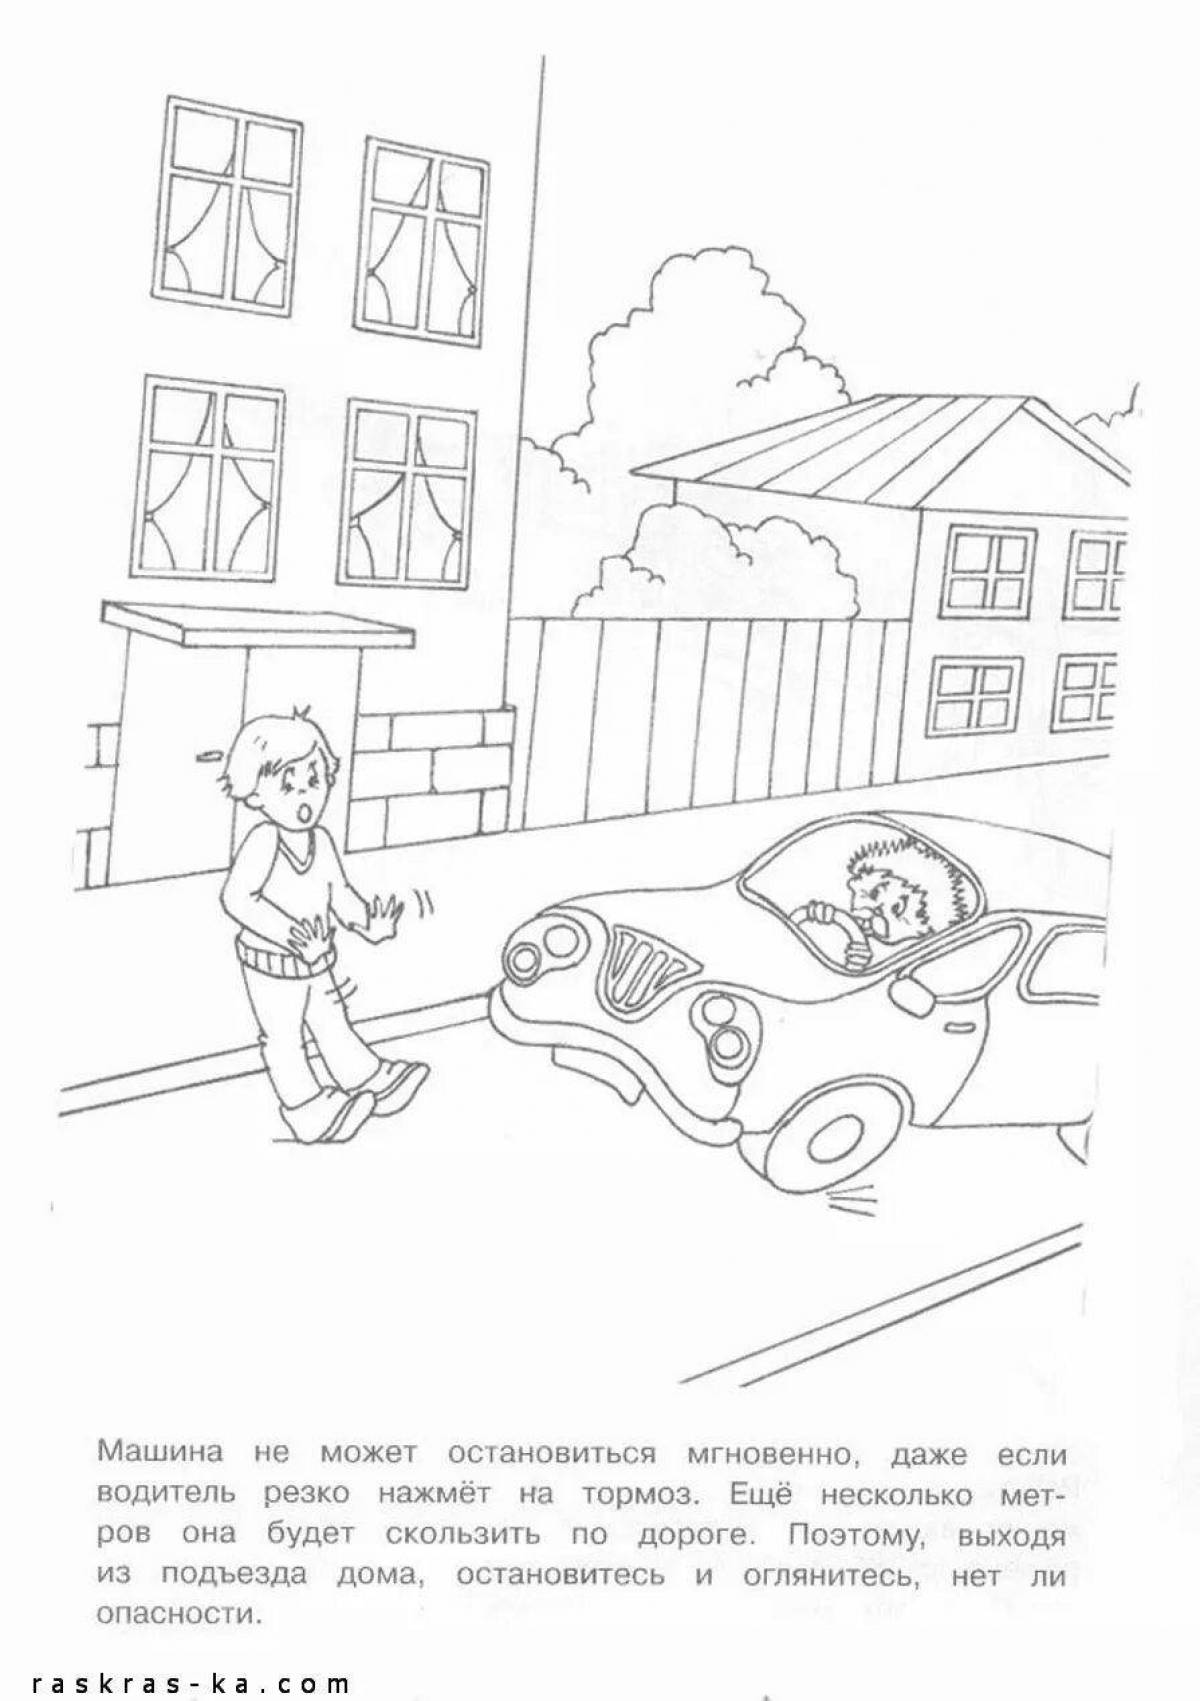 Fun road safety page for kids